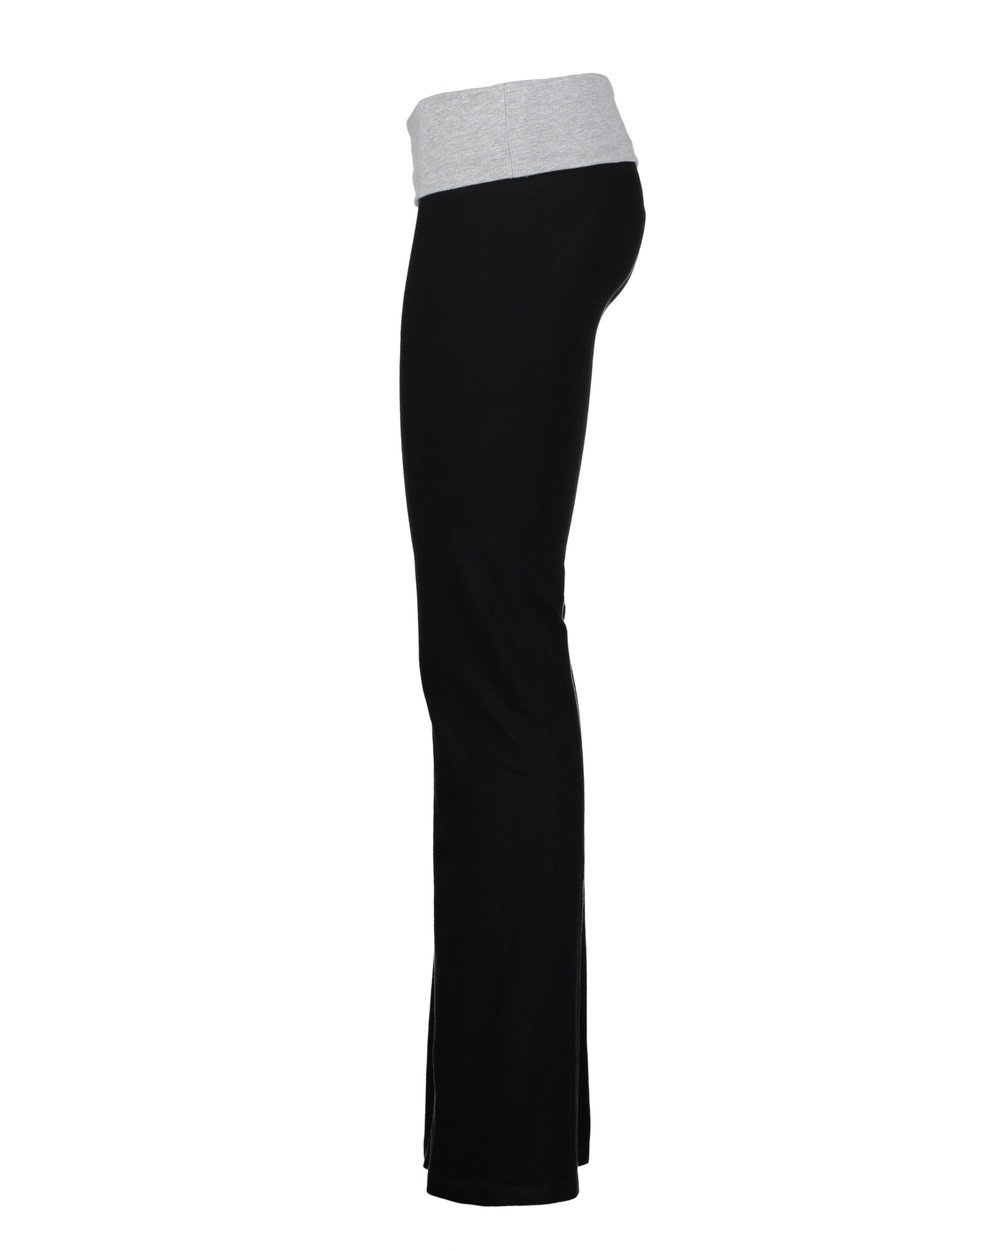 Enza® 16579 Ladies Fold Over Yoga Pant - Wholesale Apparel and